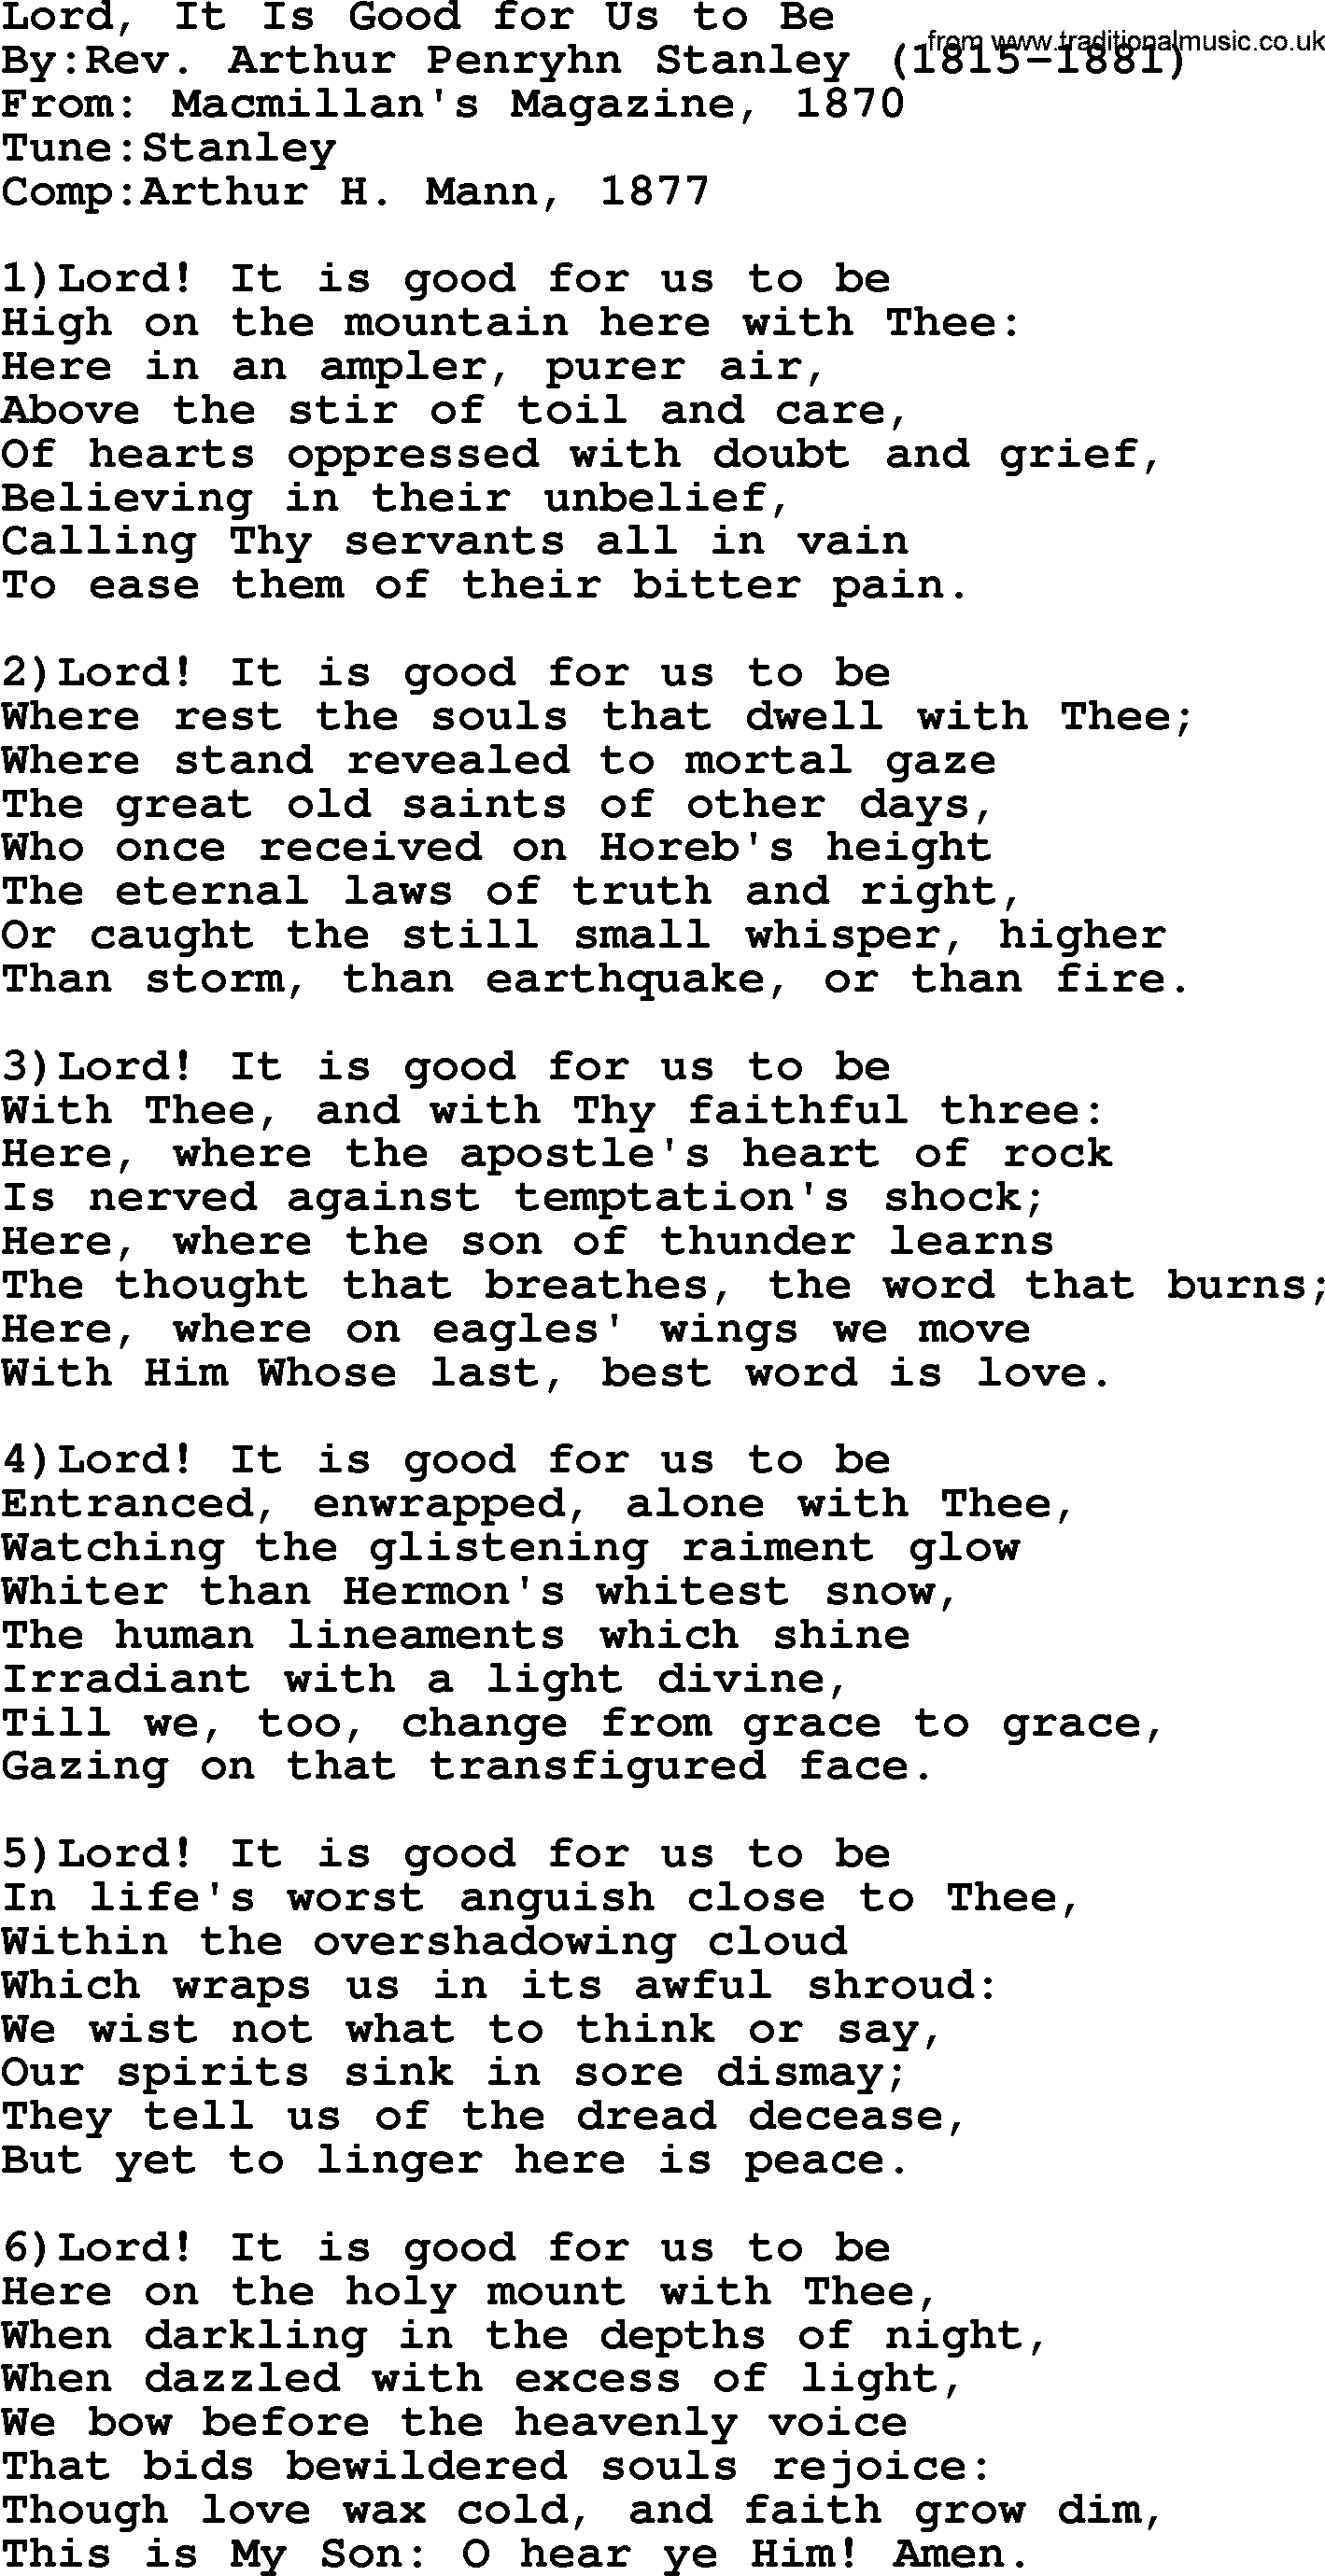 Methodist Hymn: Lord, It Is Good For Us To Be, lyrics